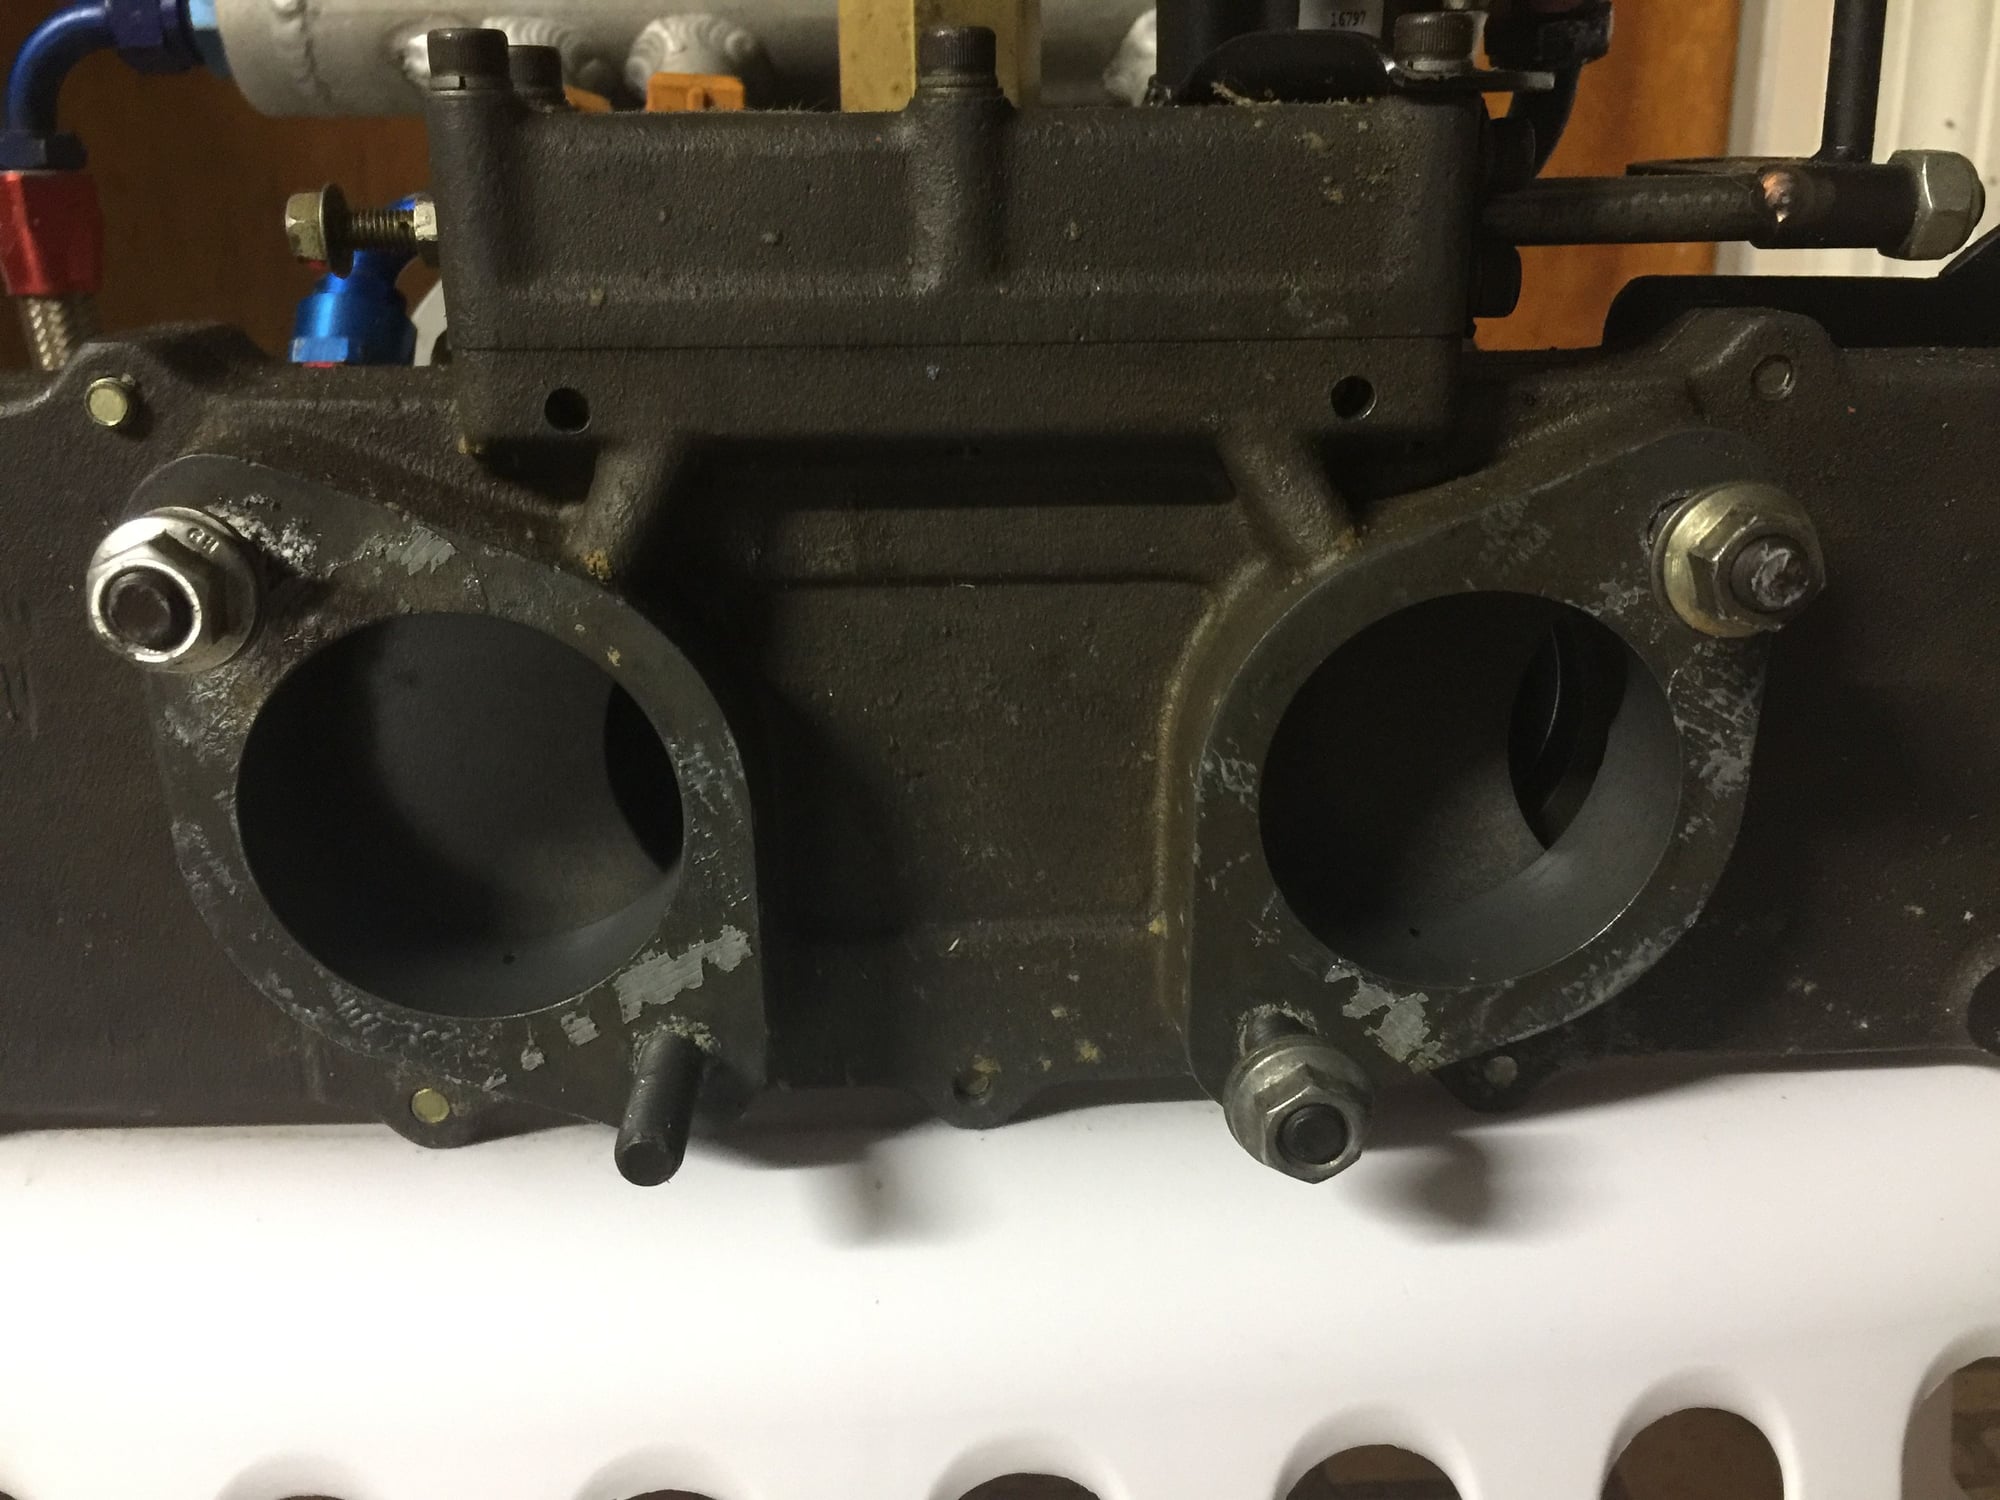 Engine - Intake/Fuel - Factory Slide Throttle Injection System - Used - 1984 to 1994 Mazda RX-7 - Fernandina Beach, FL 32034, United States